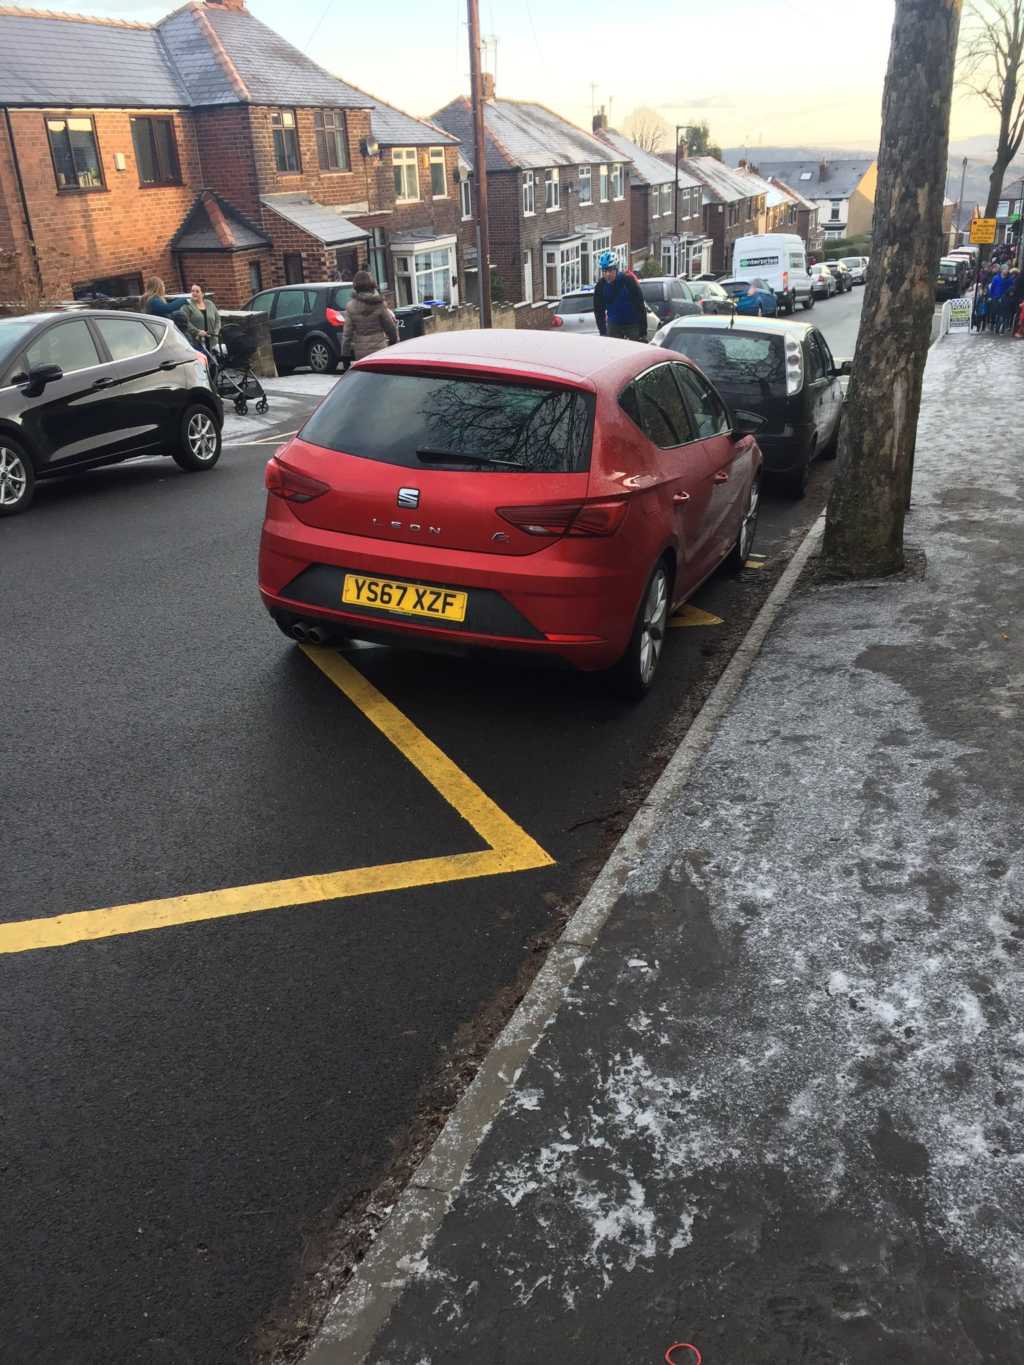 YS67 XZF is a Selfish Parker